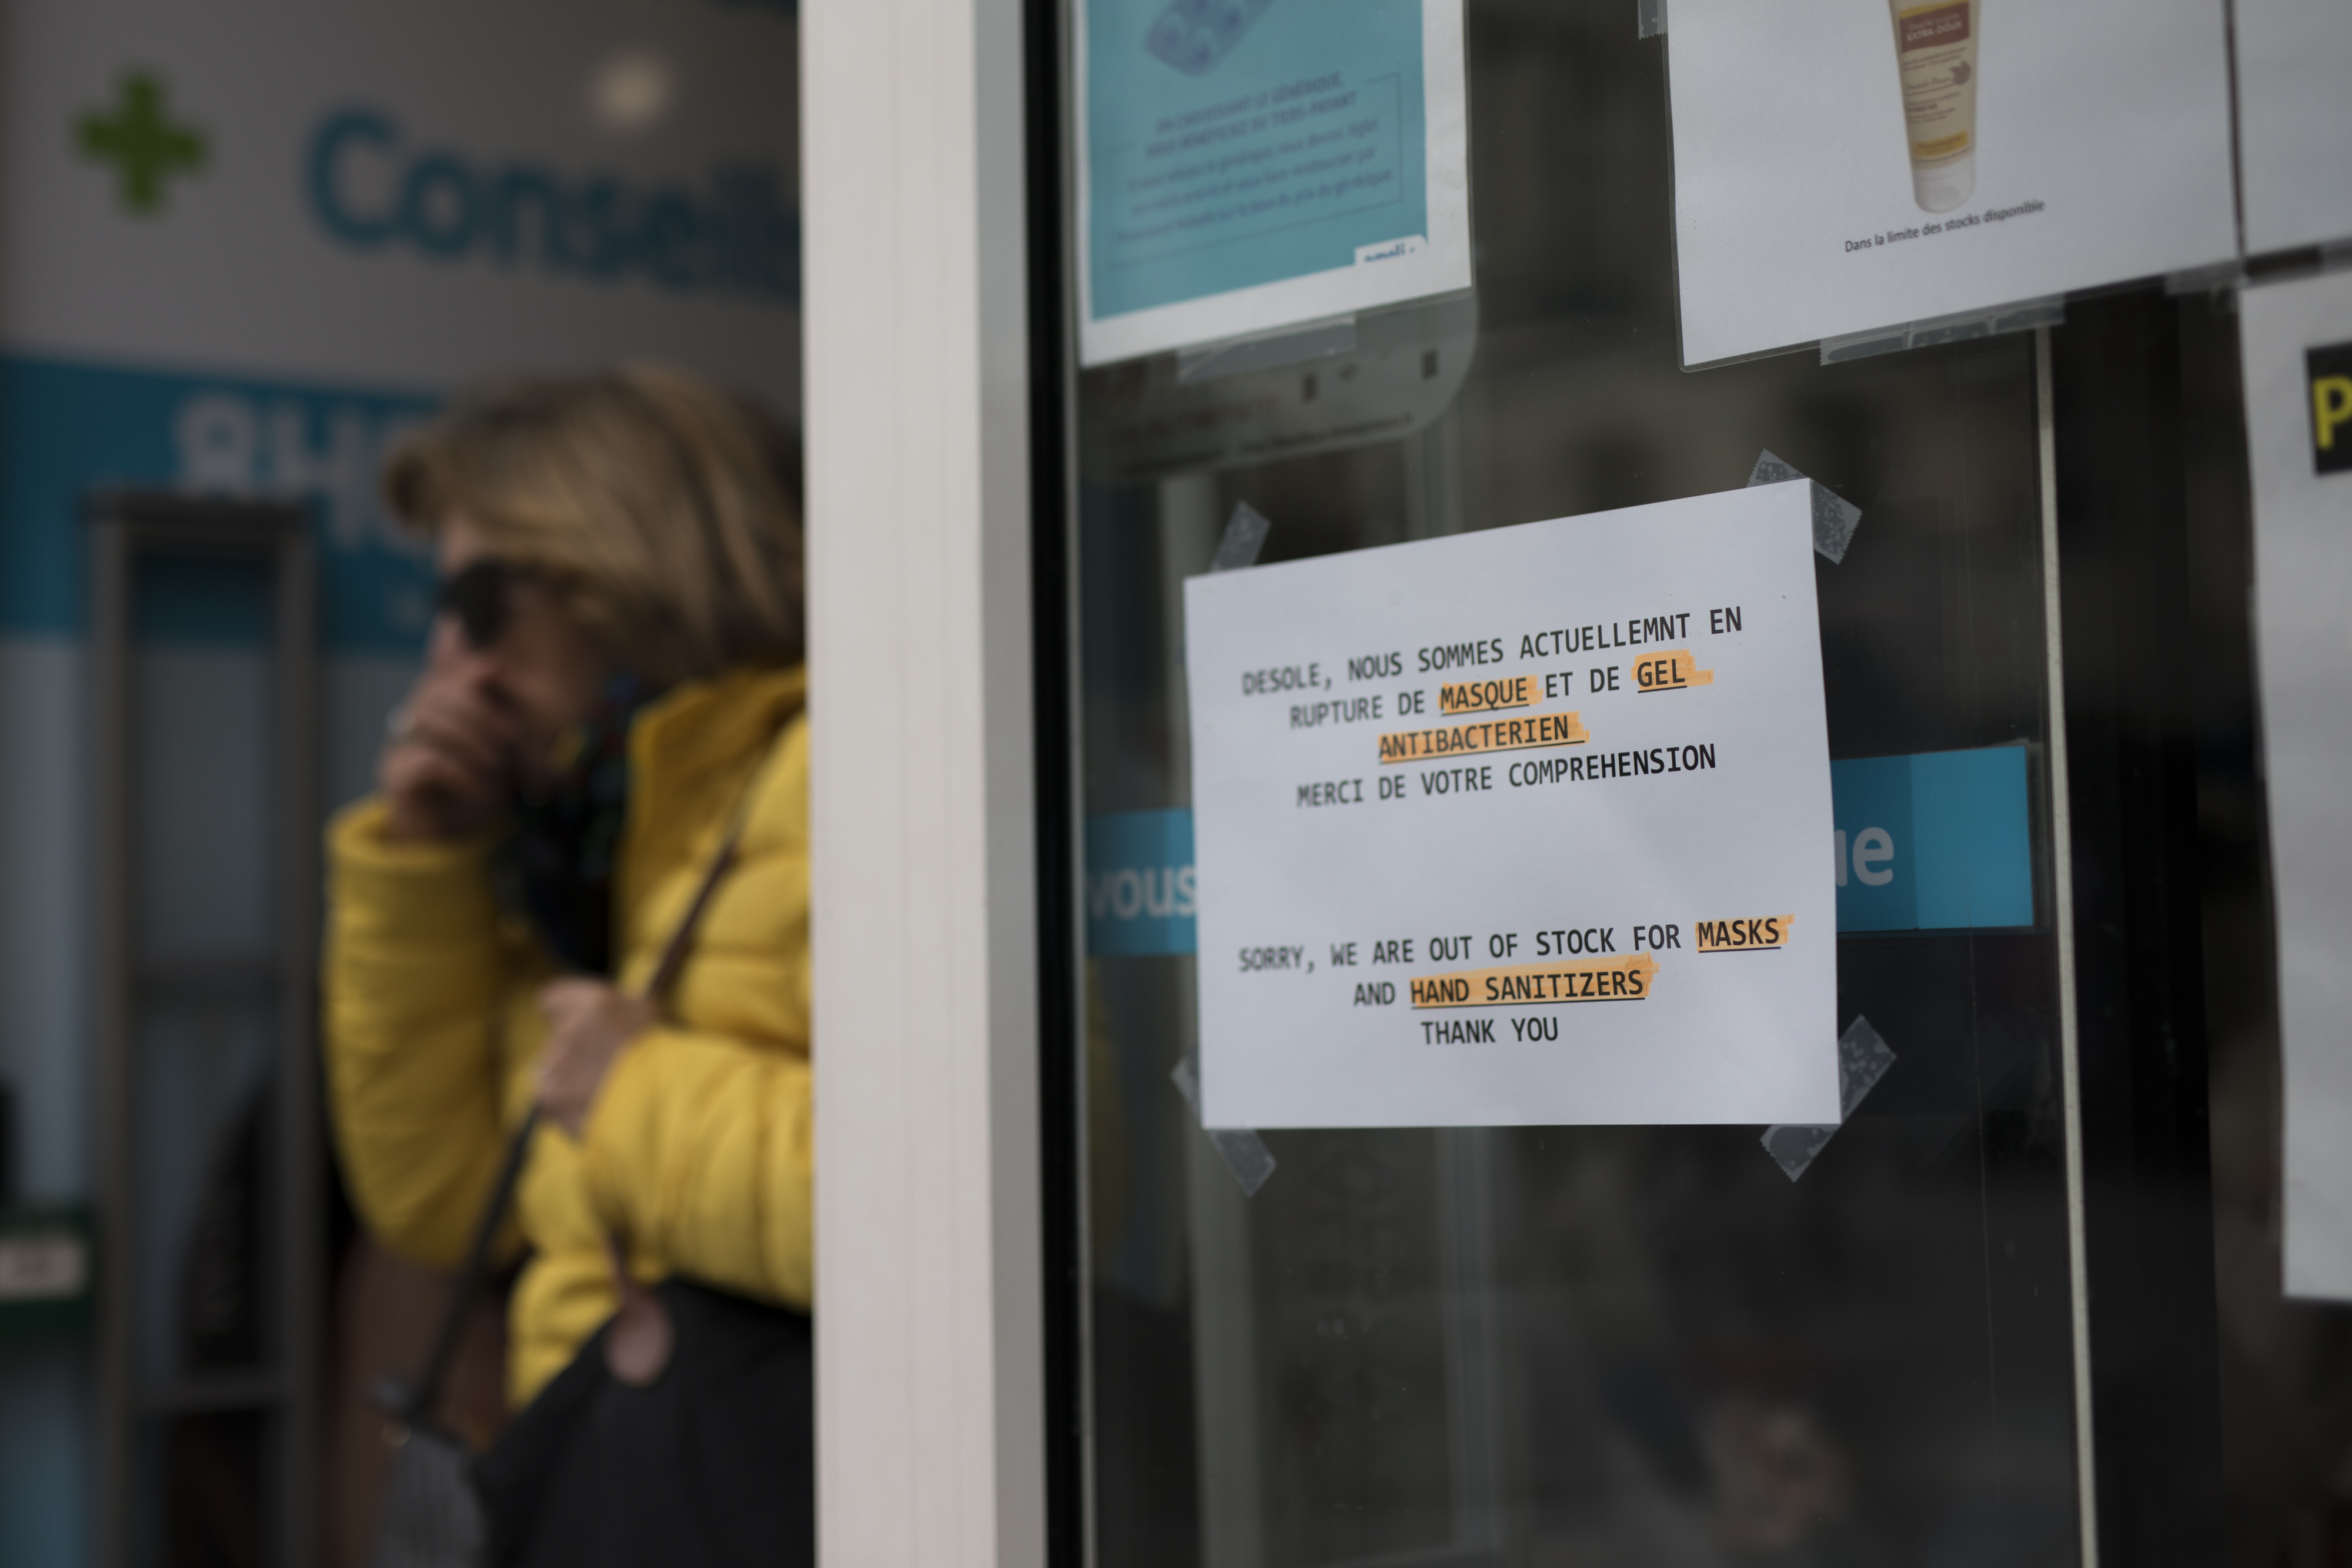 A sign is displayed at the entrance to a pharmacy in Marseille, southern France, on Tuesday, March 3.